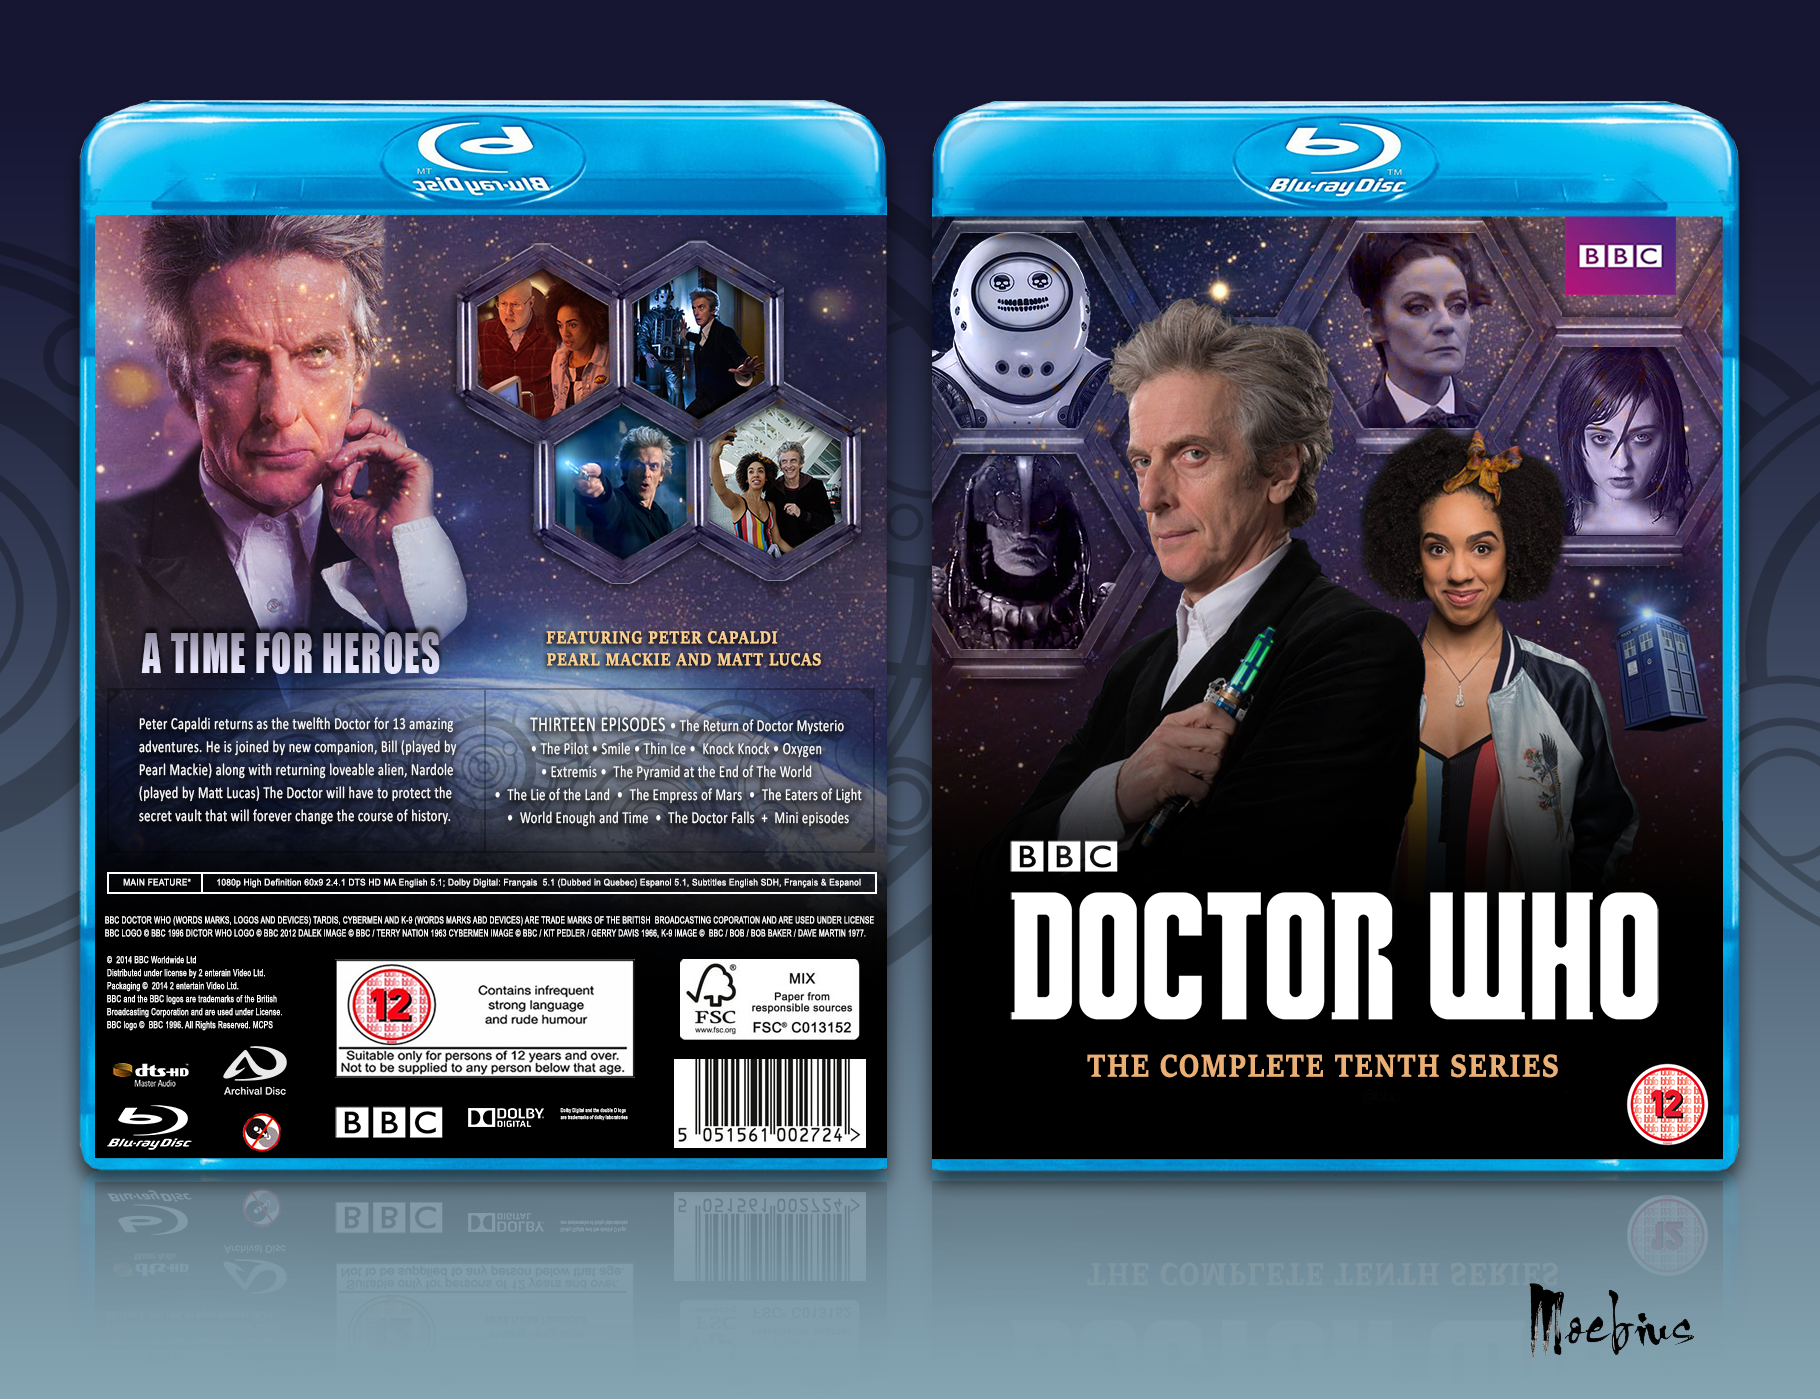 Doctor Who Series 10 box cover